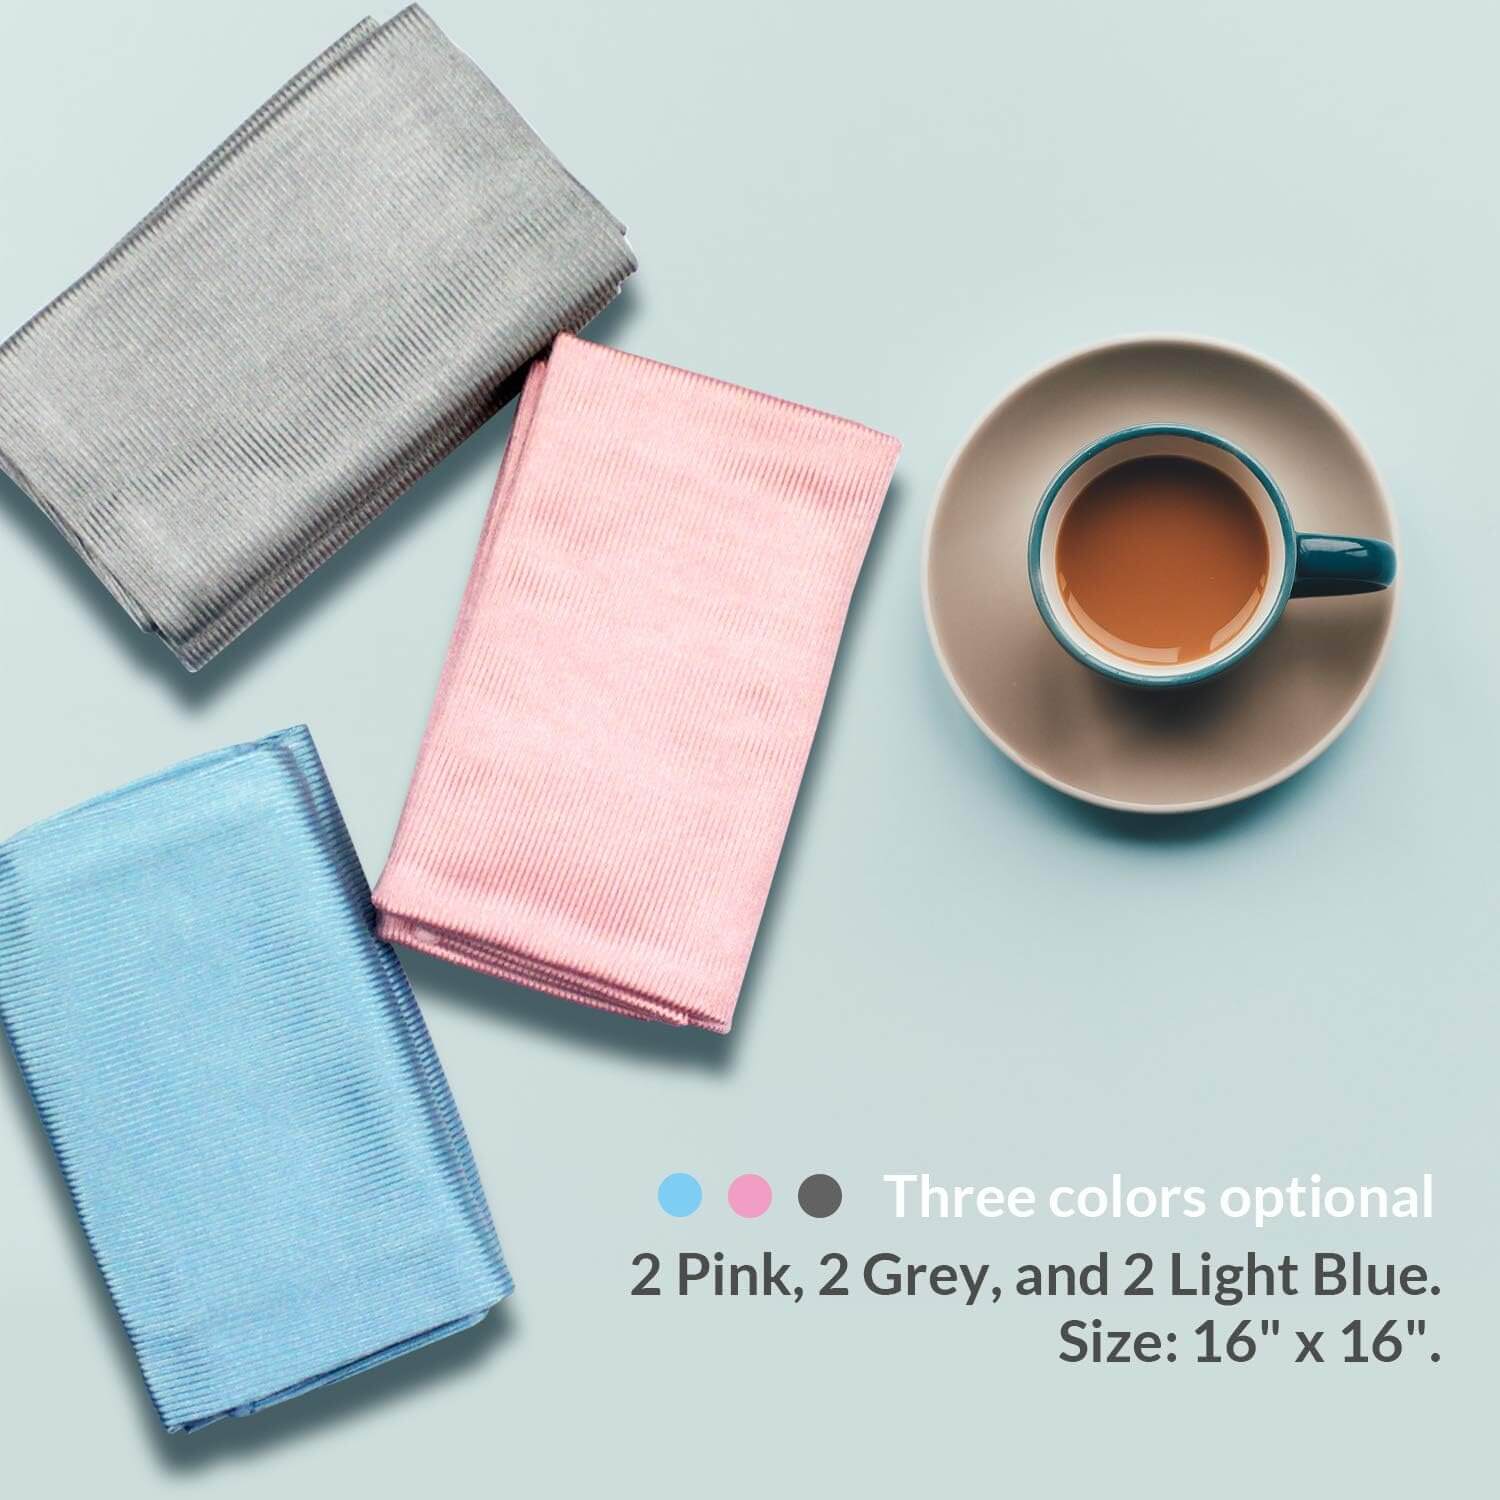 ZERLA Microfiber Glass Cleaning Cloths Streak Free - Lint Free - Quickly Clean Windows, Windshields, Mirrors, and Stainless Steel- 6 Pack - Three colors optional